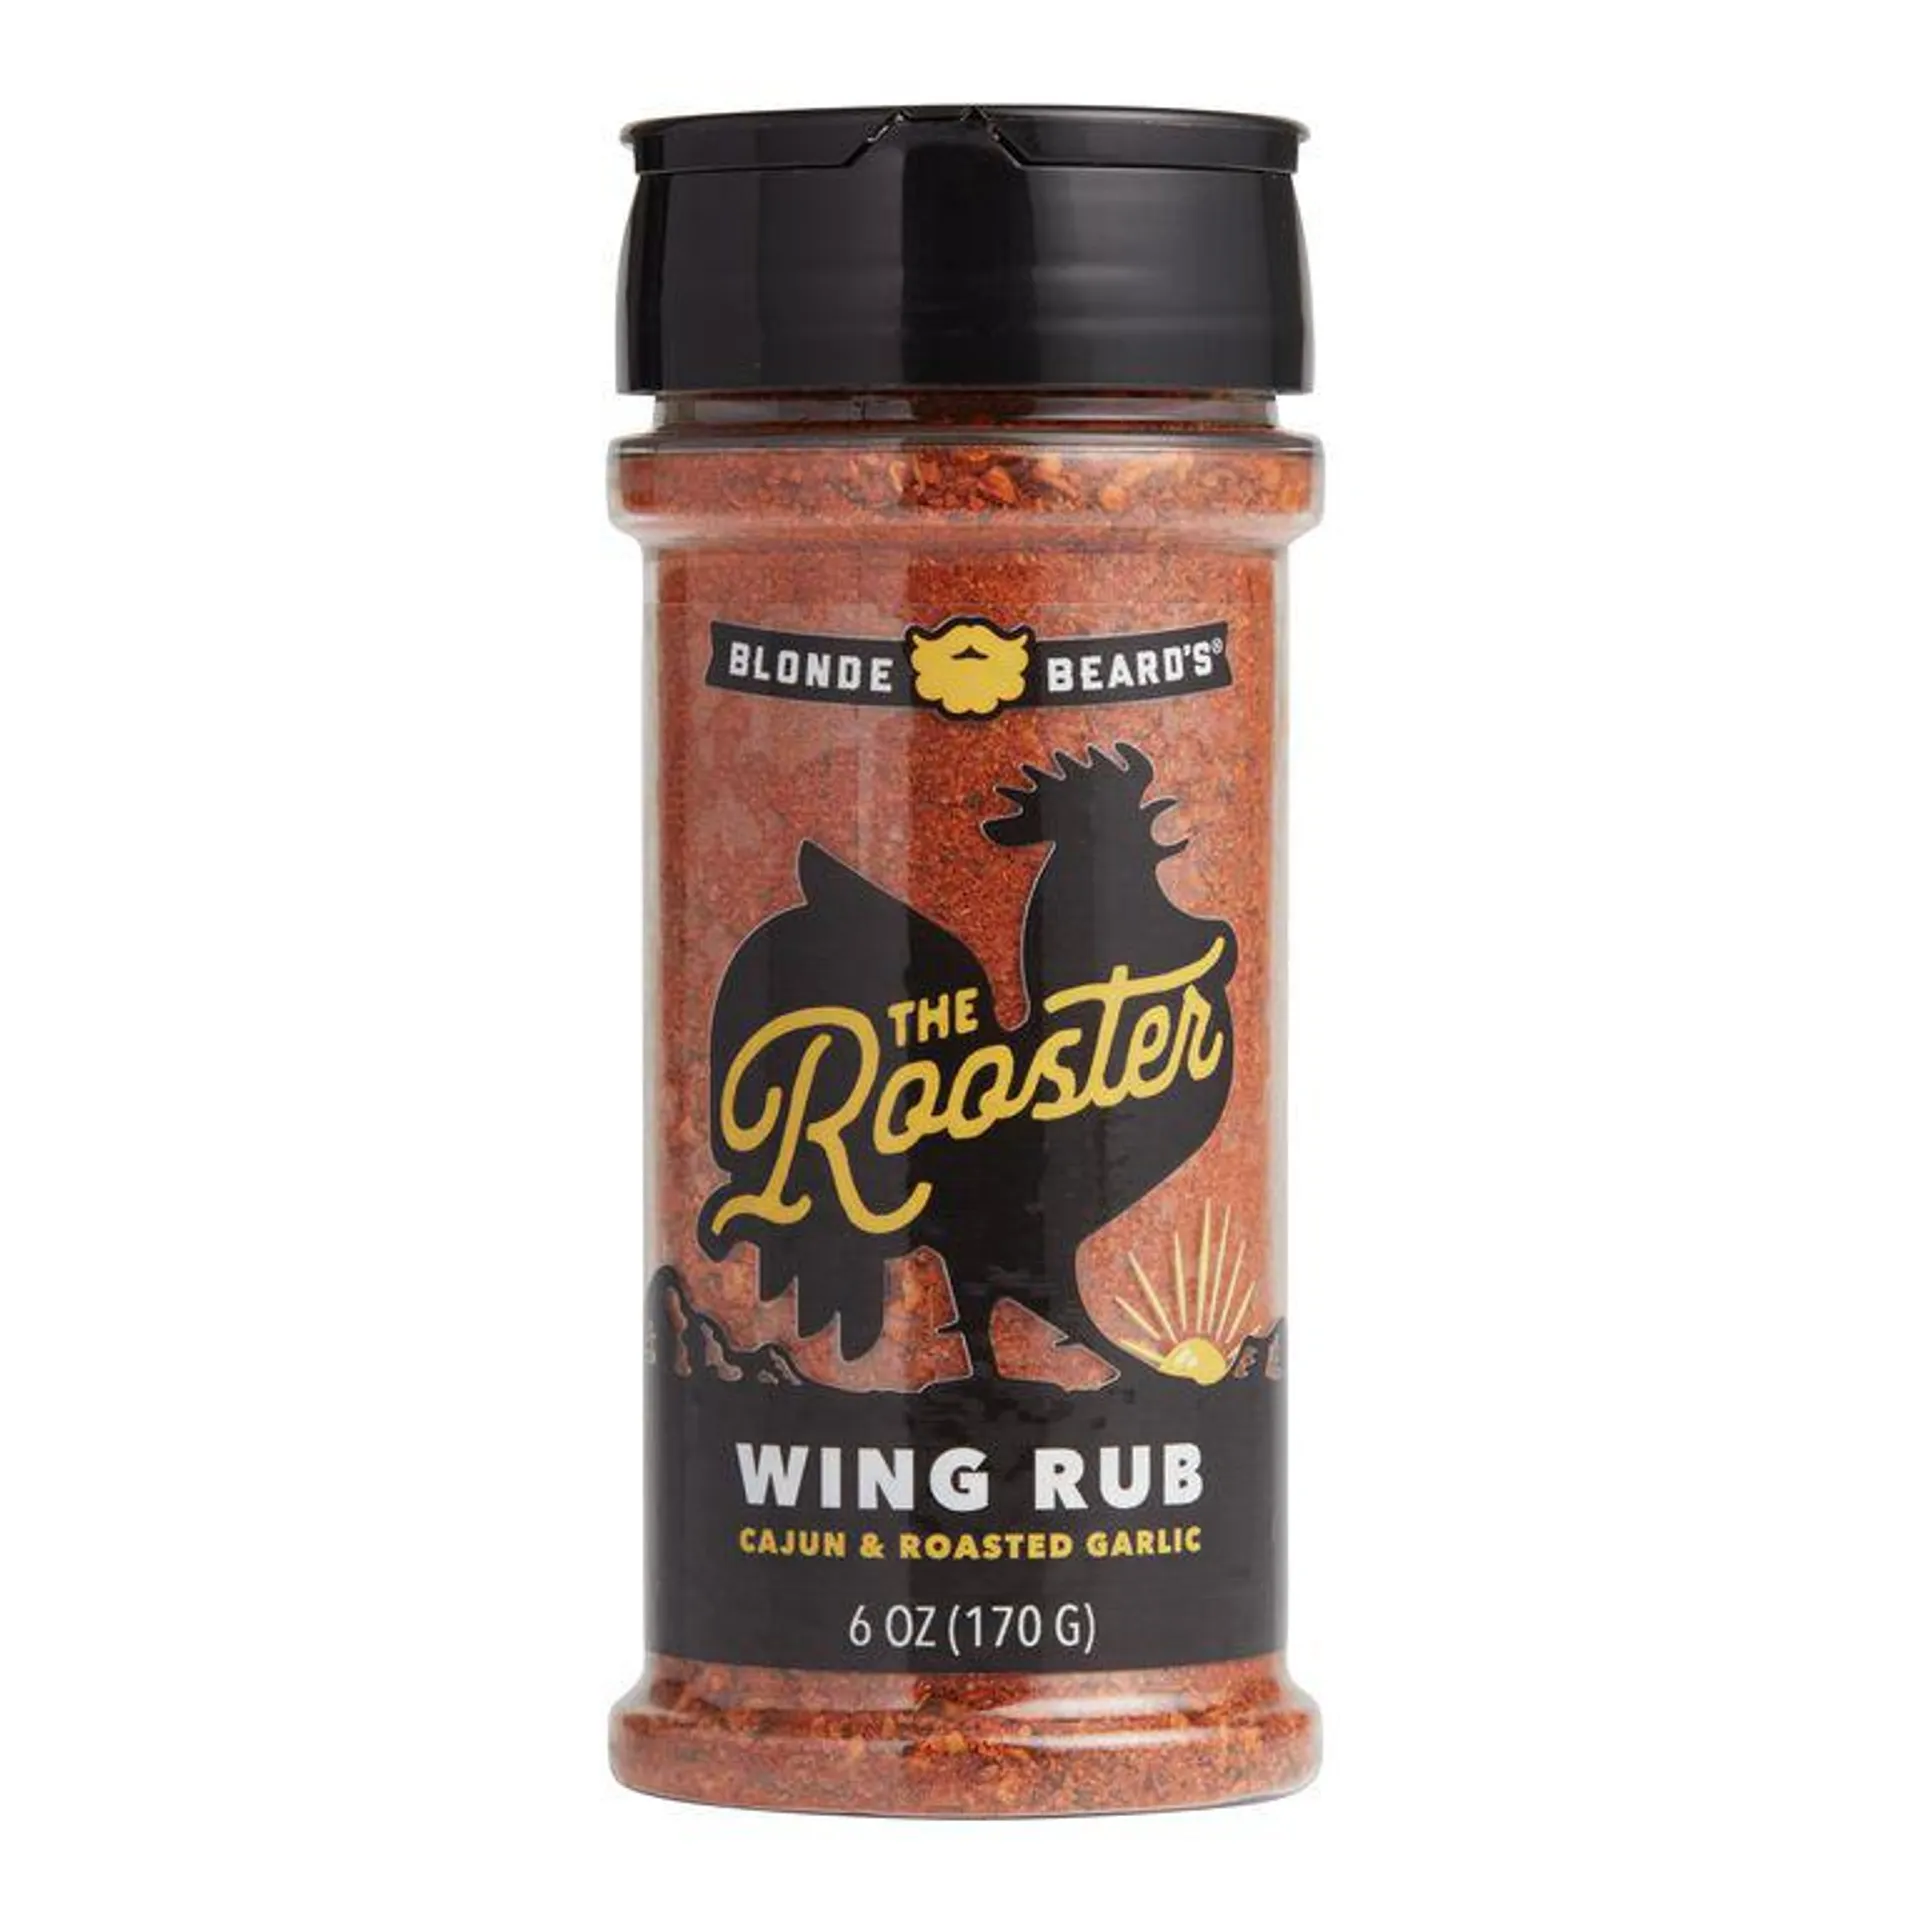 Blonde Beard's The Rooster Wing Rub